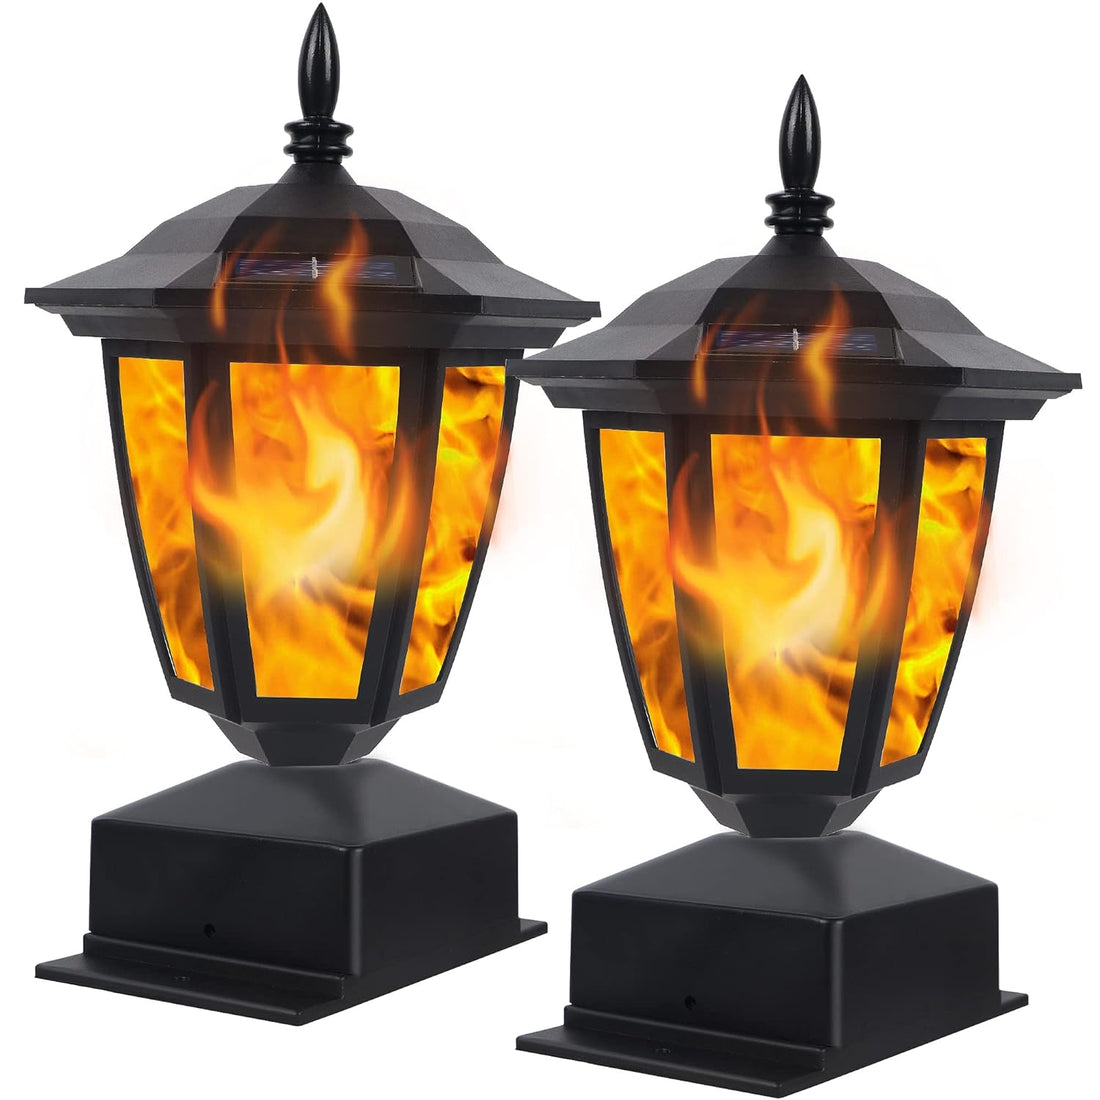 Dynaming Solar Flame Post Lights Outdoor, Solar Powered Lamps Fence Post Cap Lights, Flickering Flame LED Lantern Decorative Waterproof for Garden Deck Patio, Fit 4x4, 5x5 or 6x6 Wooden Posts, 2 Pack